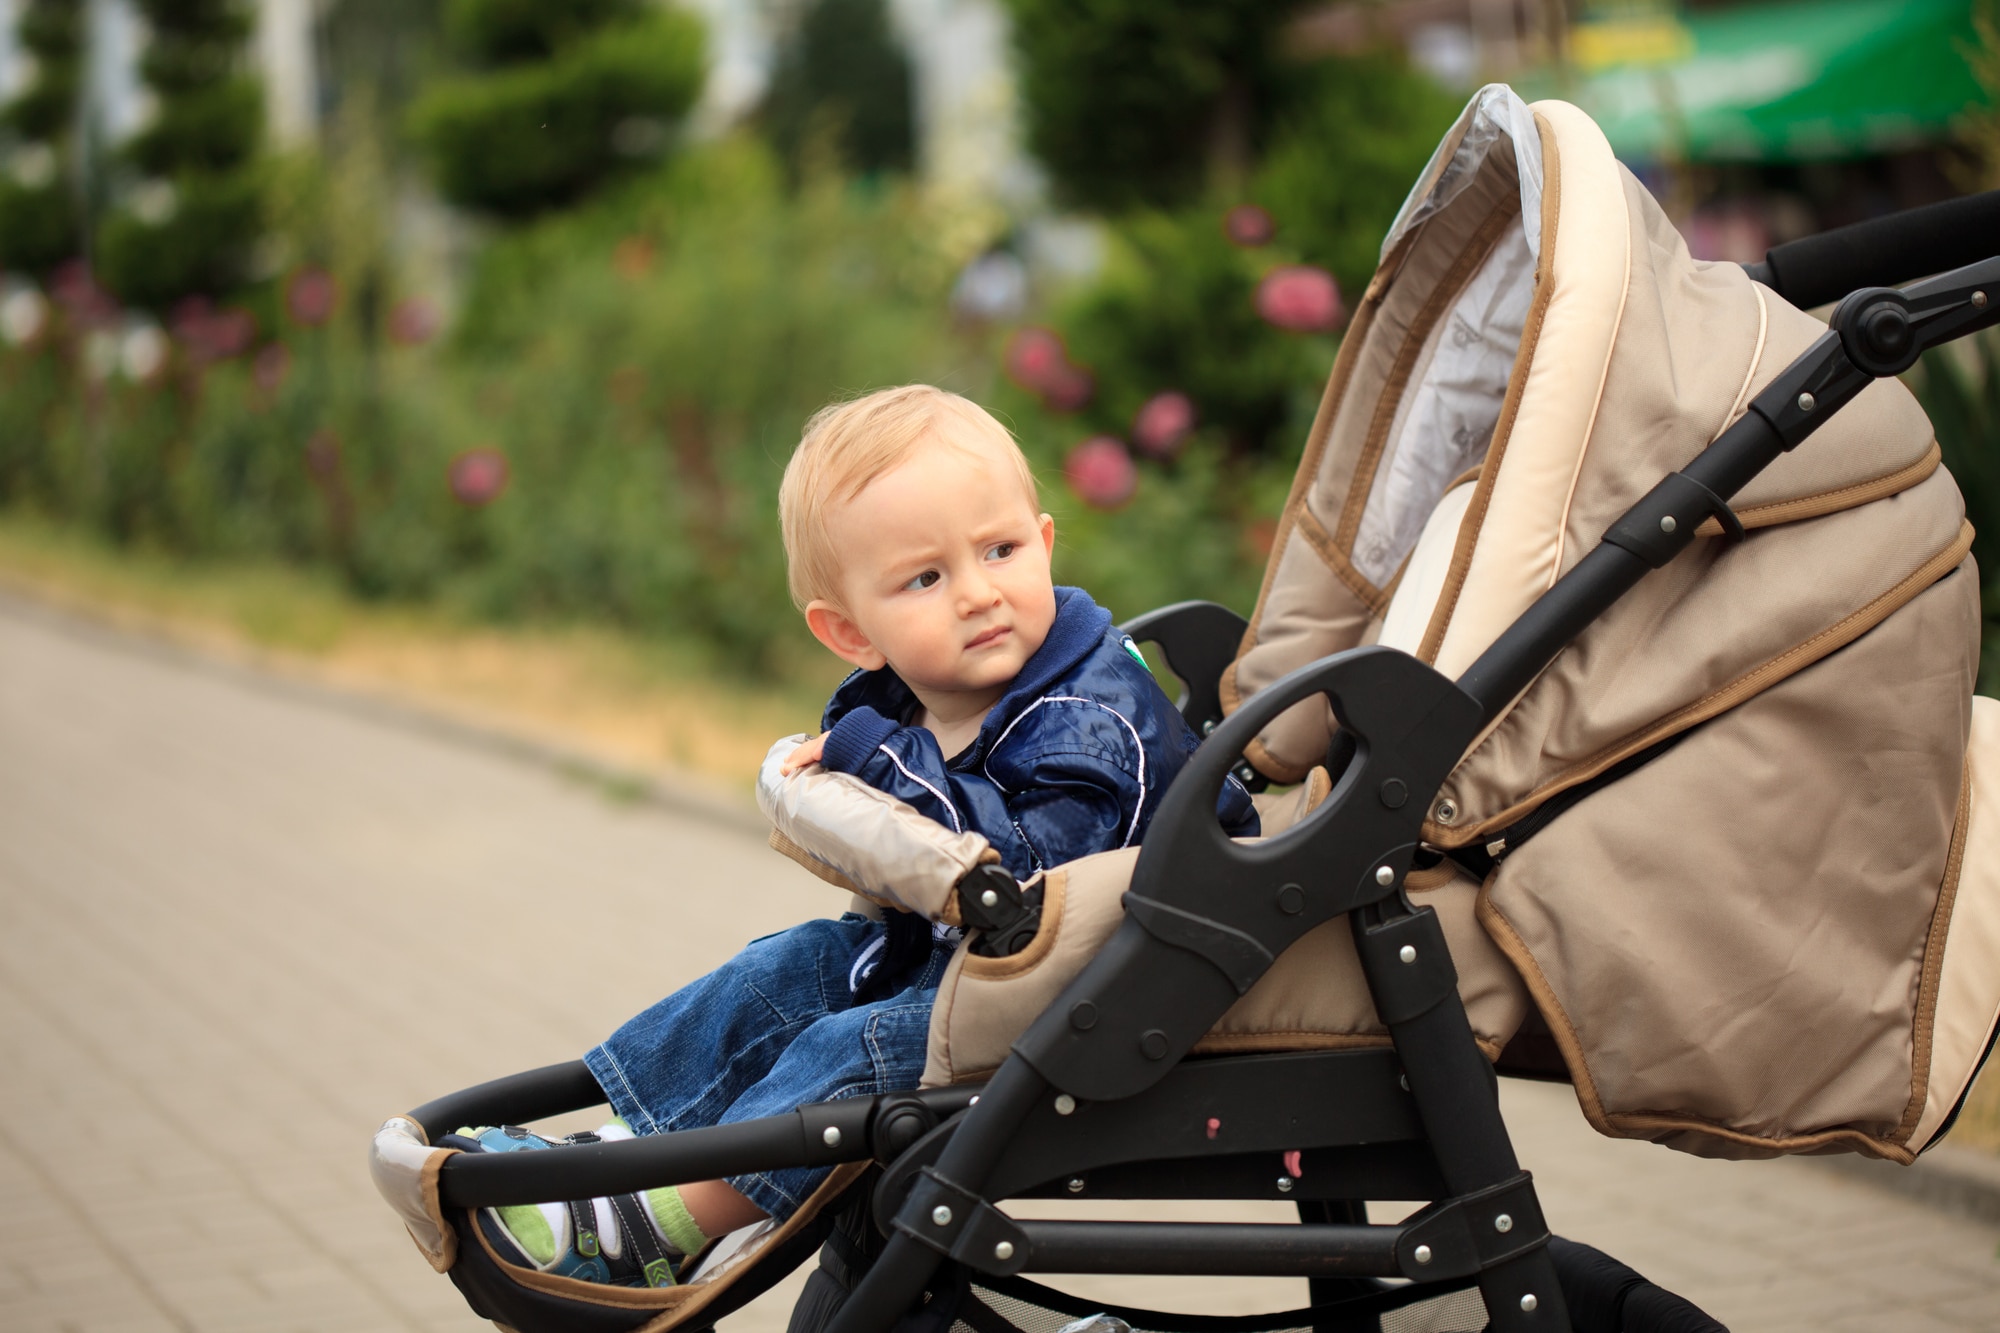 Toddler in baby carriage